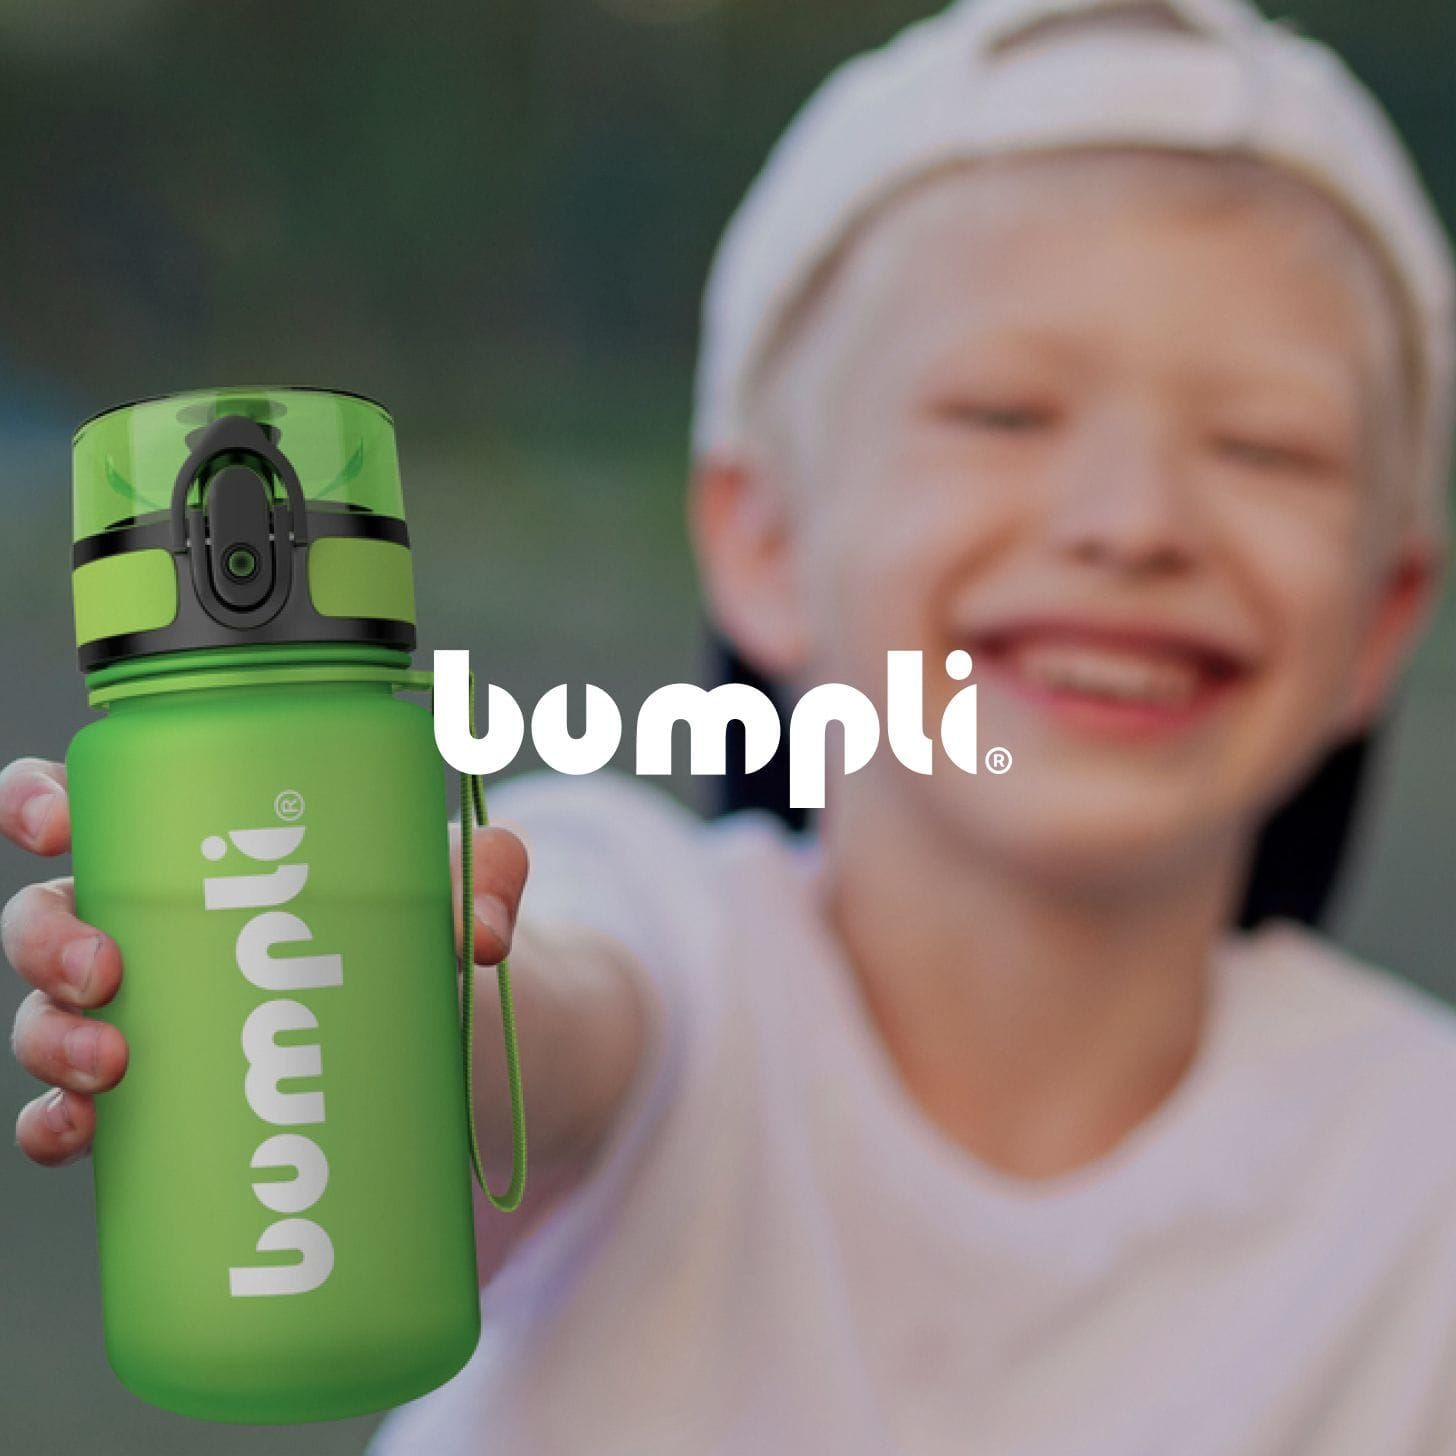 Marketing image from Bumpli with their logo for over the top.